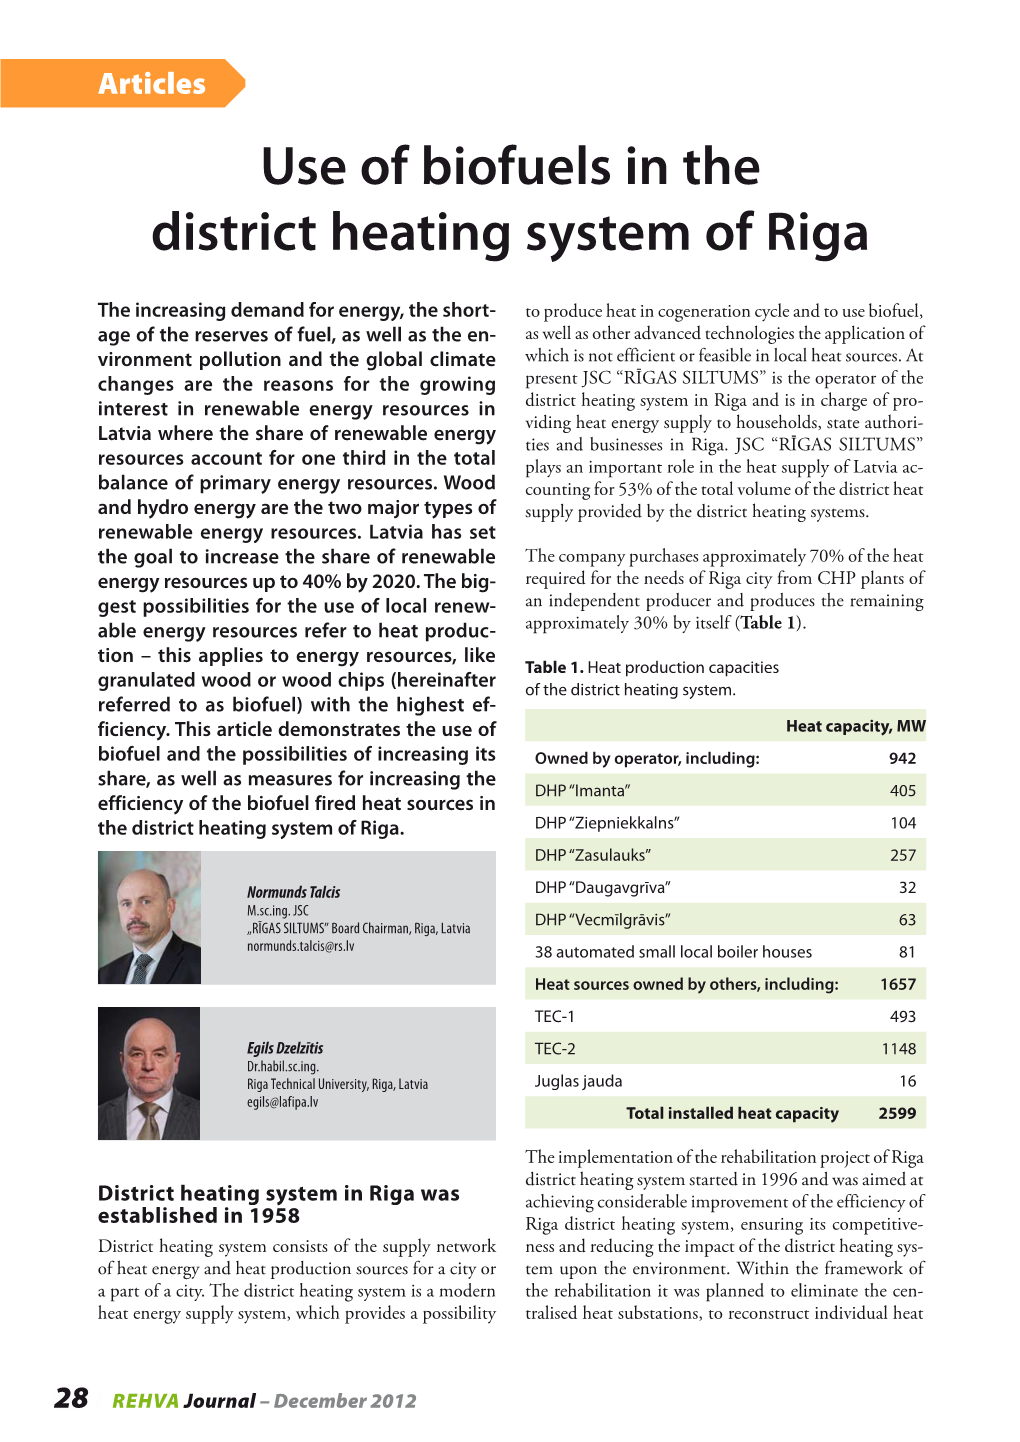 Use of Biofuels in the District Heating System of Riga